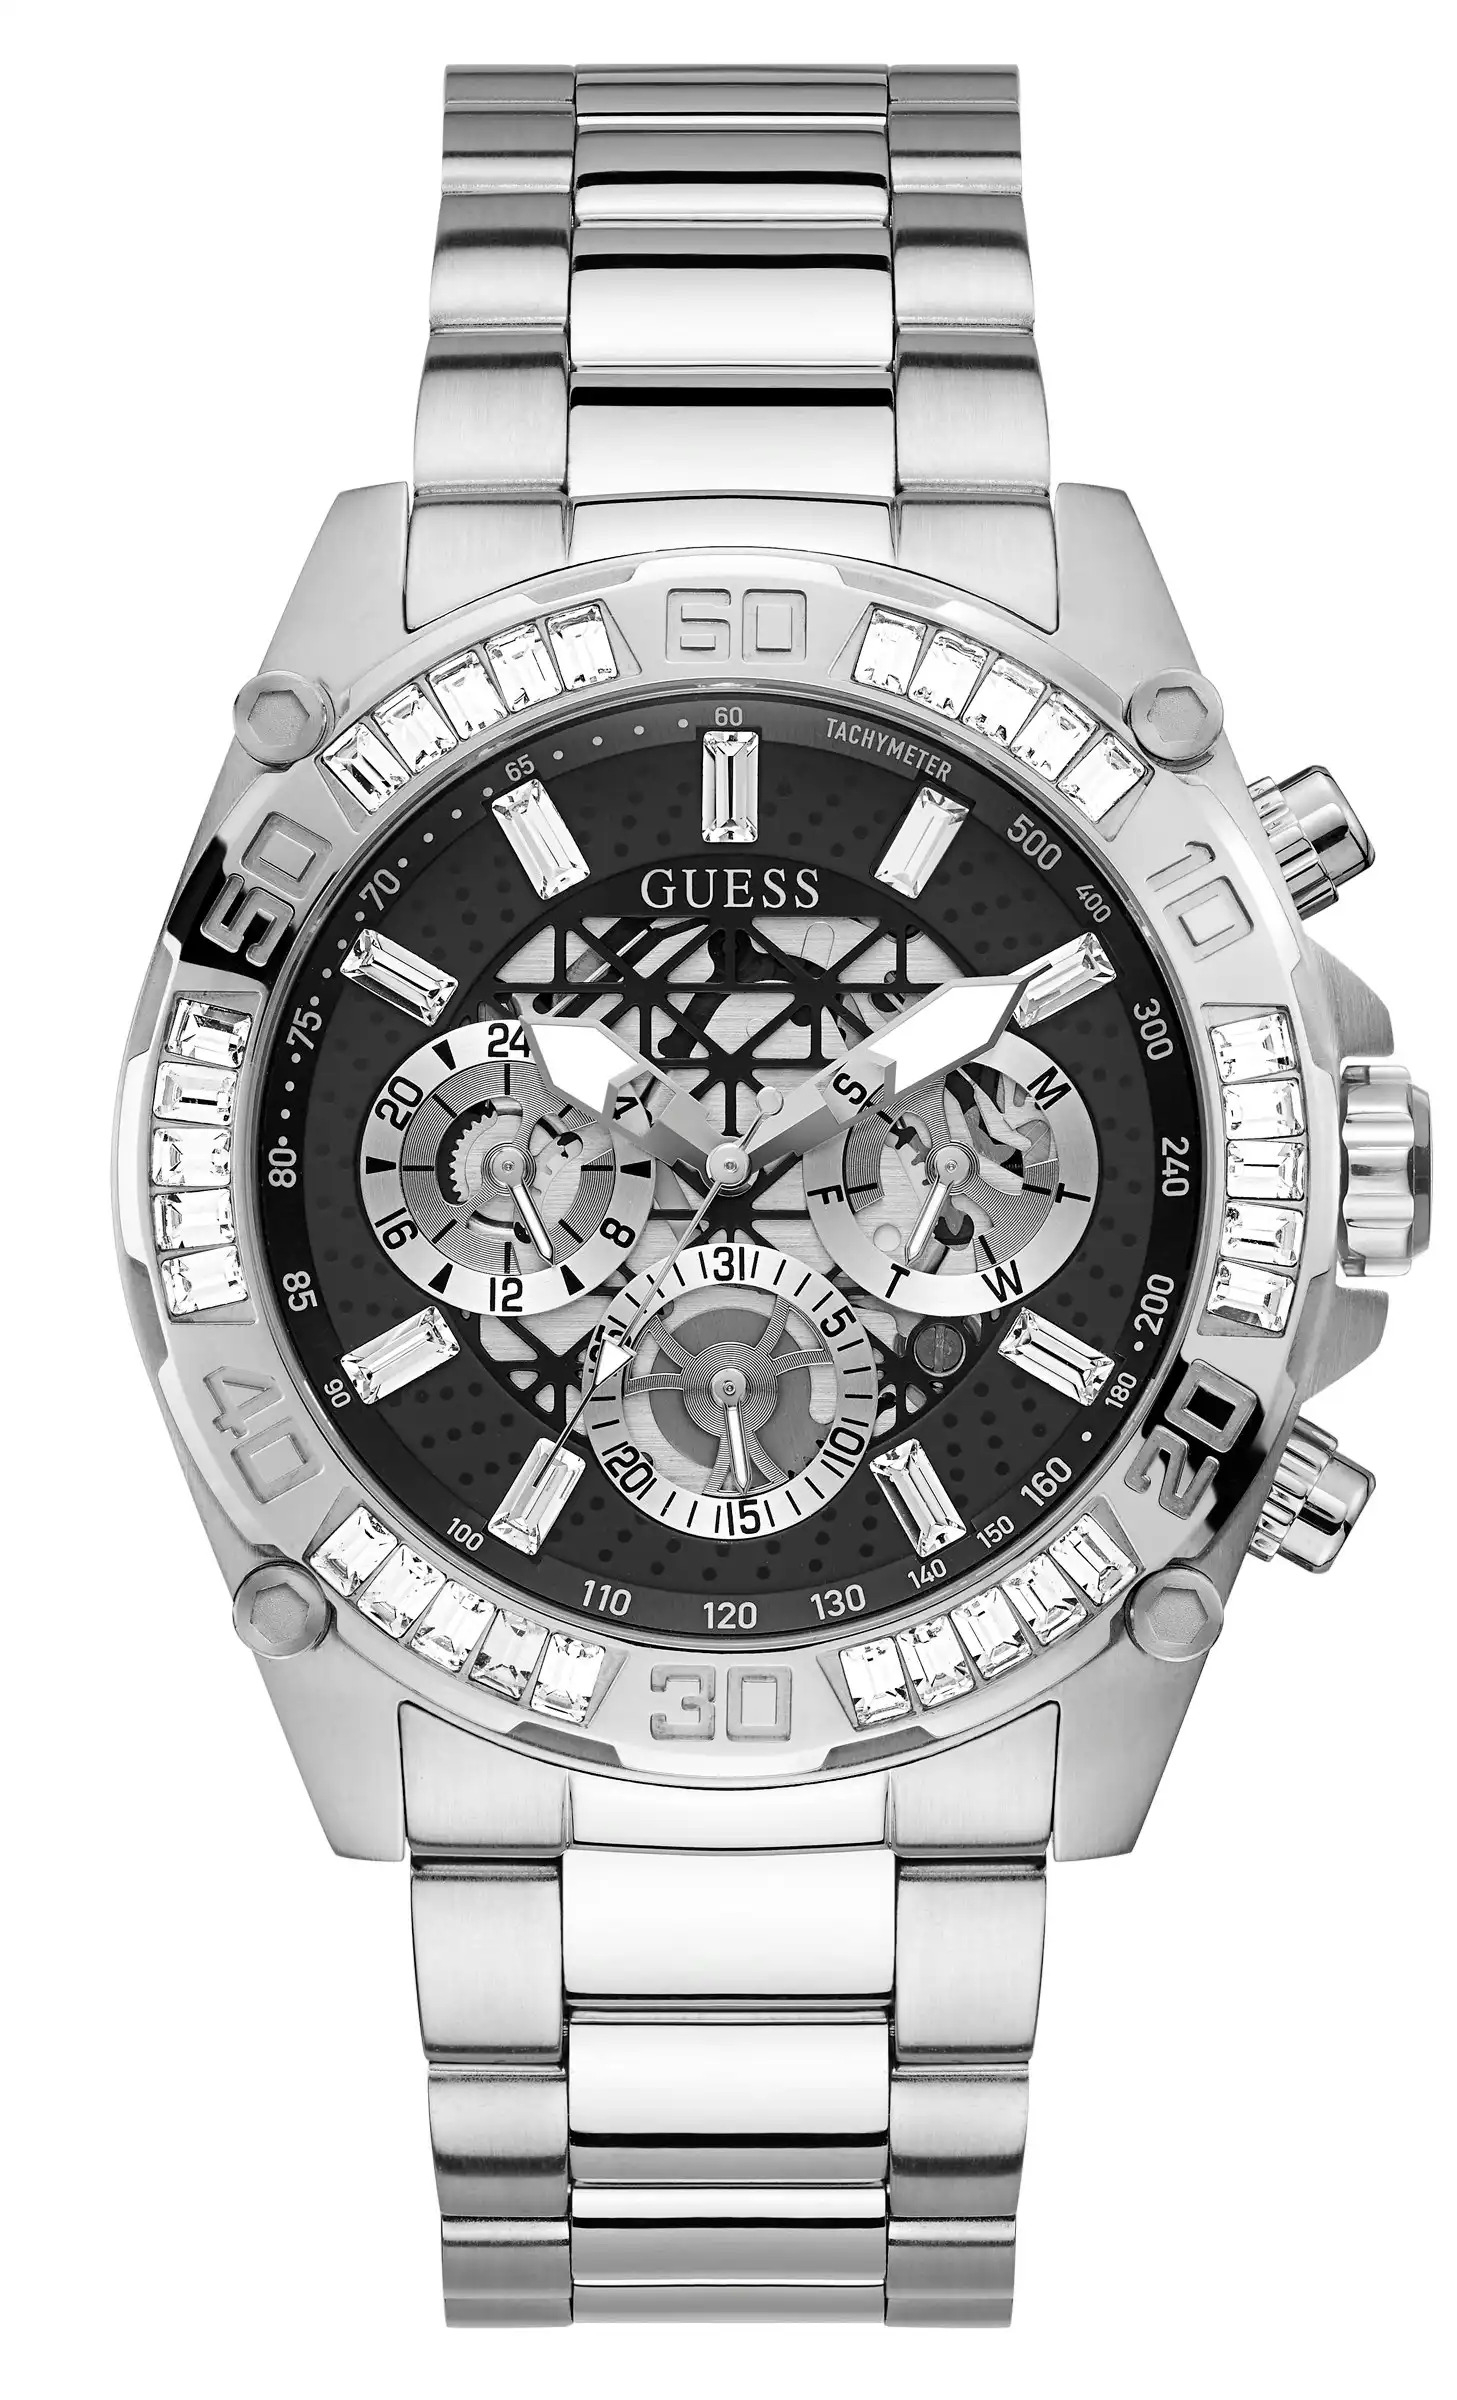 Guess Trophy Black and Silver Men's Analogue Watch GW0390G1